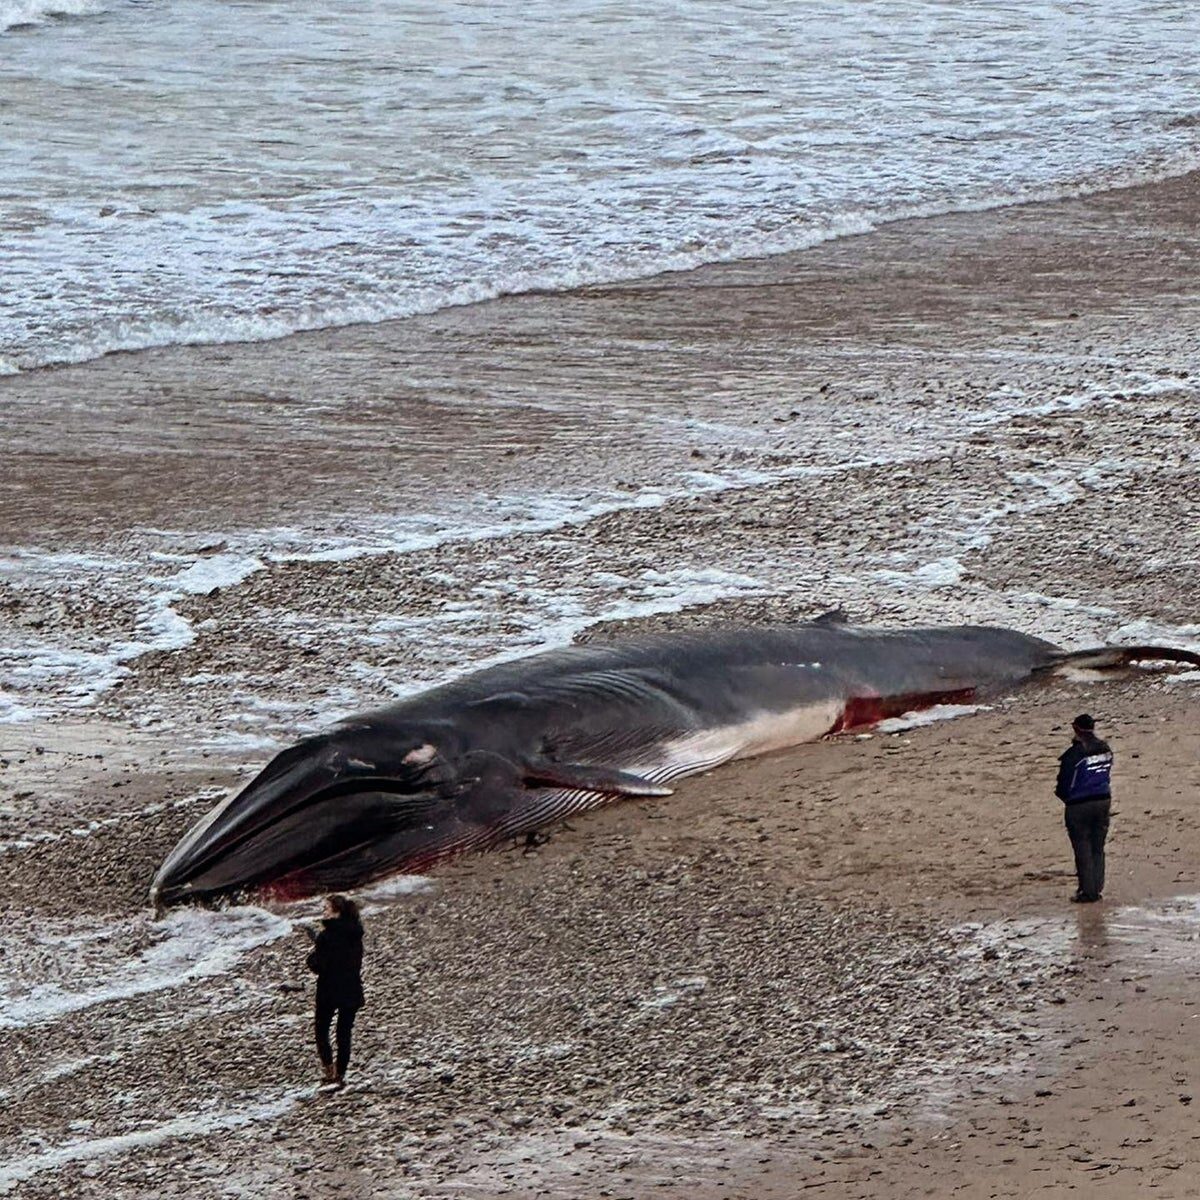 Police cordon off area after large whale found dead by surfers at Fistral Beach